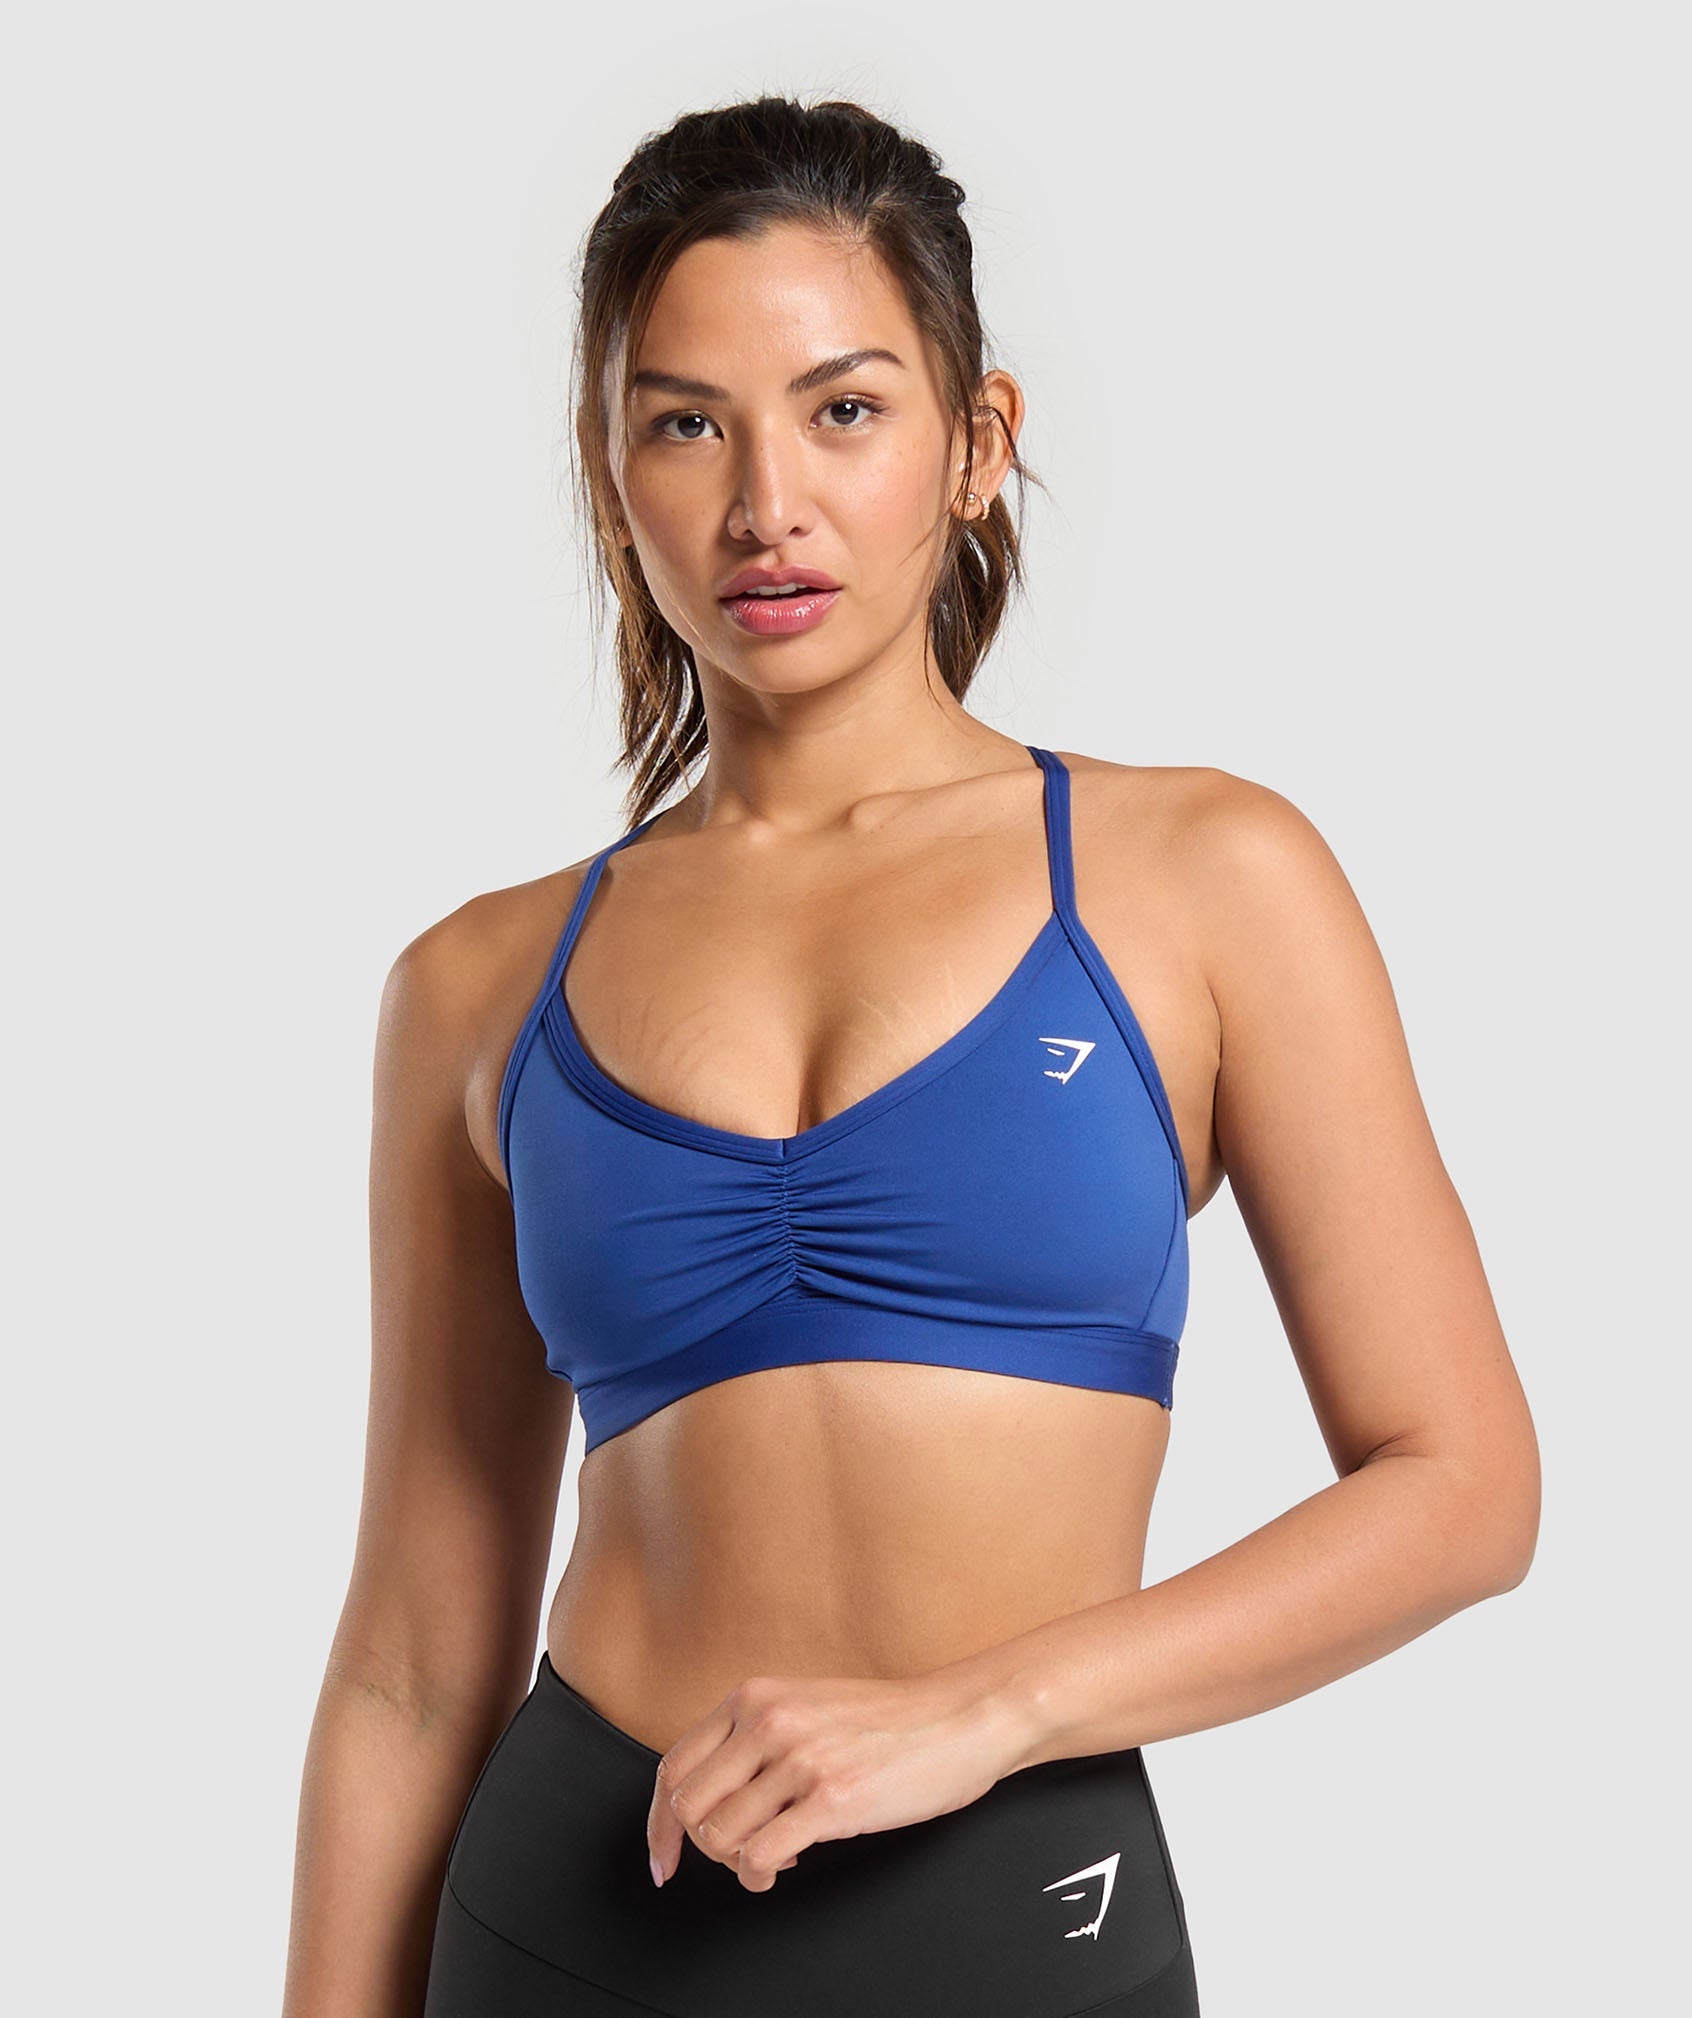 Ruched Strappy Sports Bra in Wave Blue is out of stock